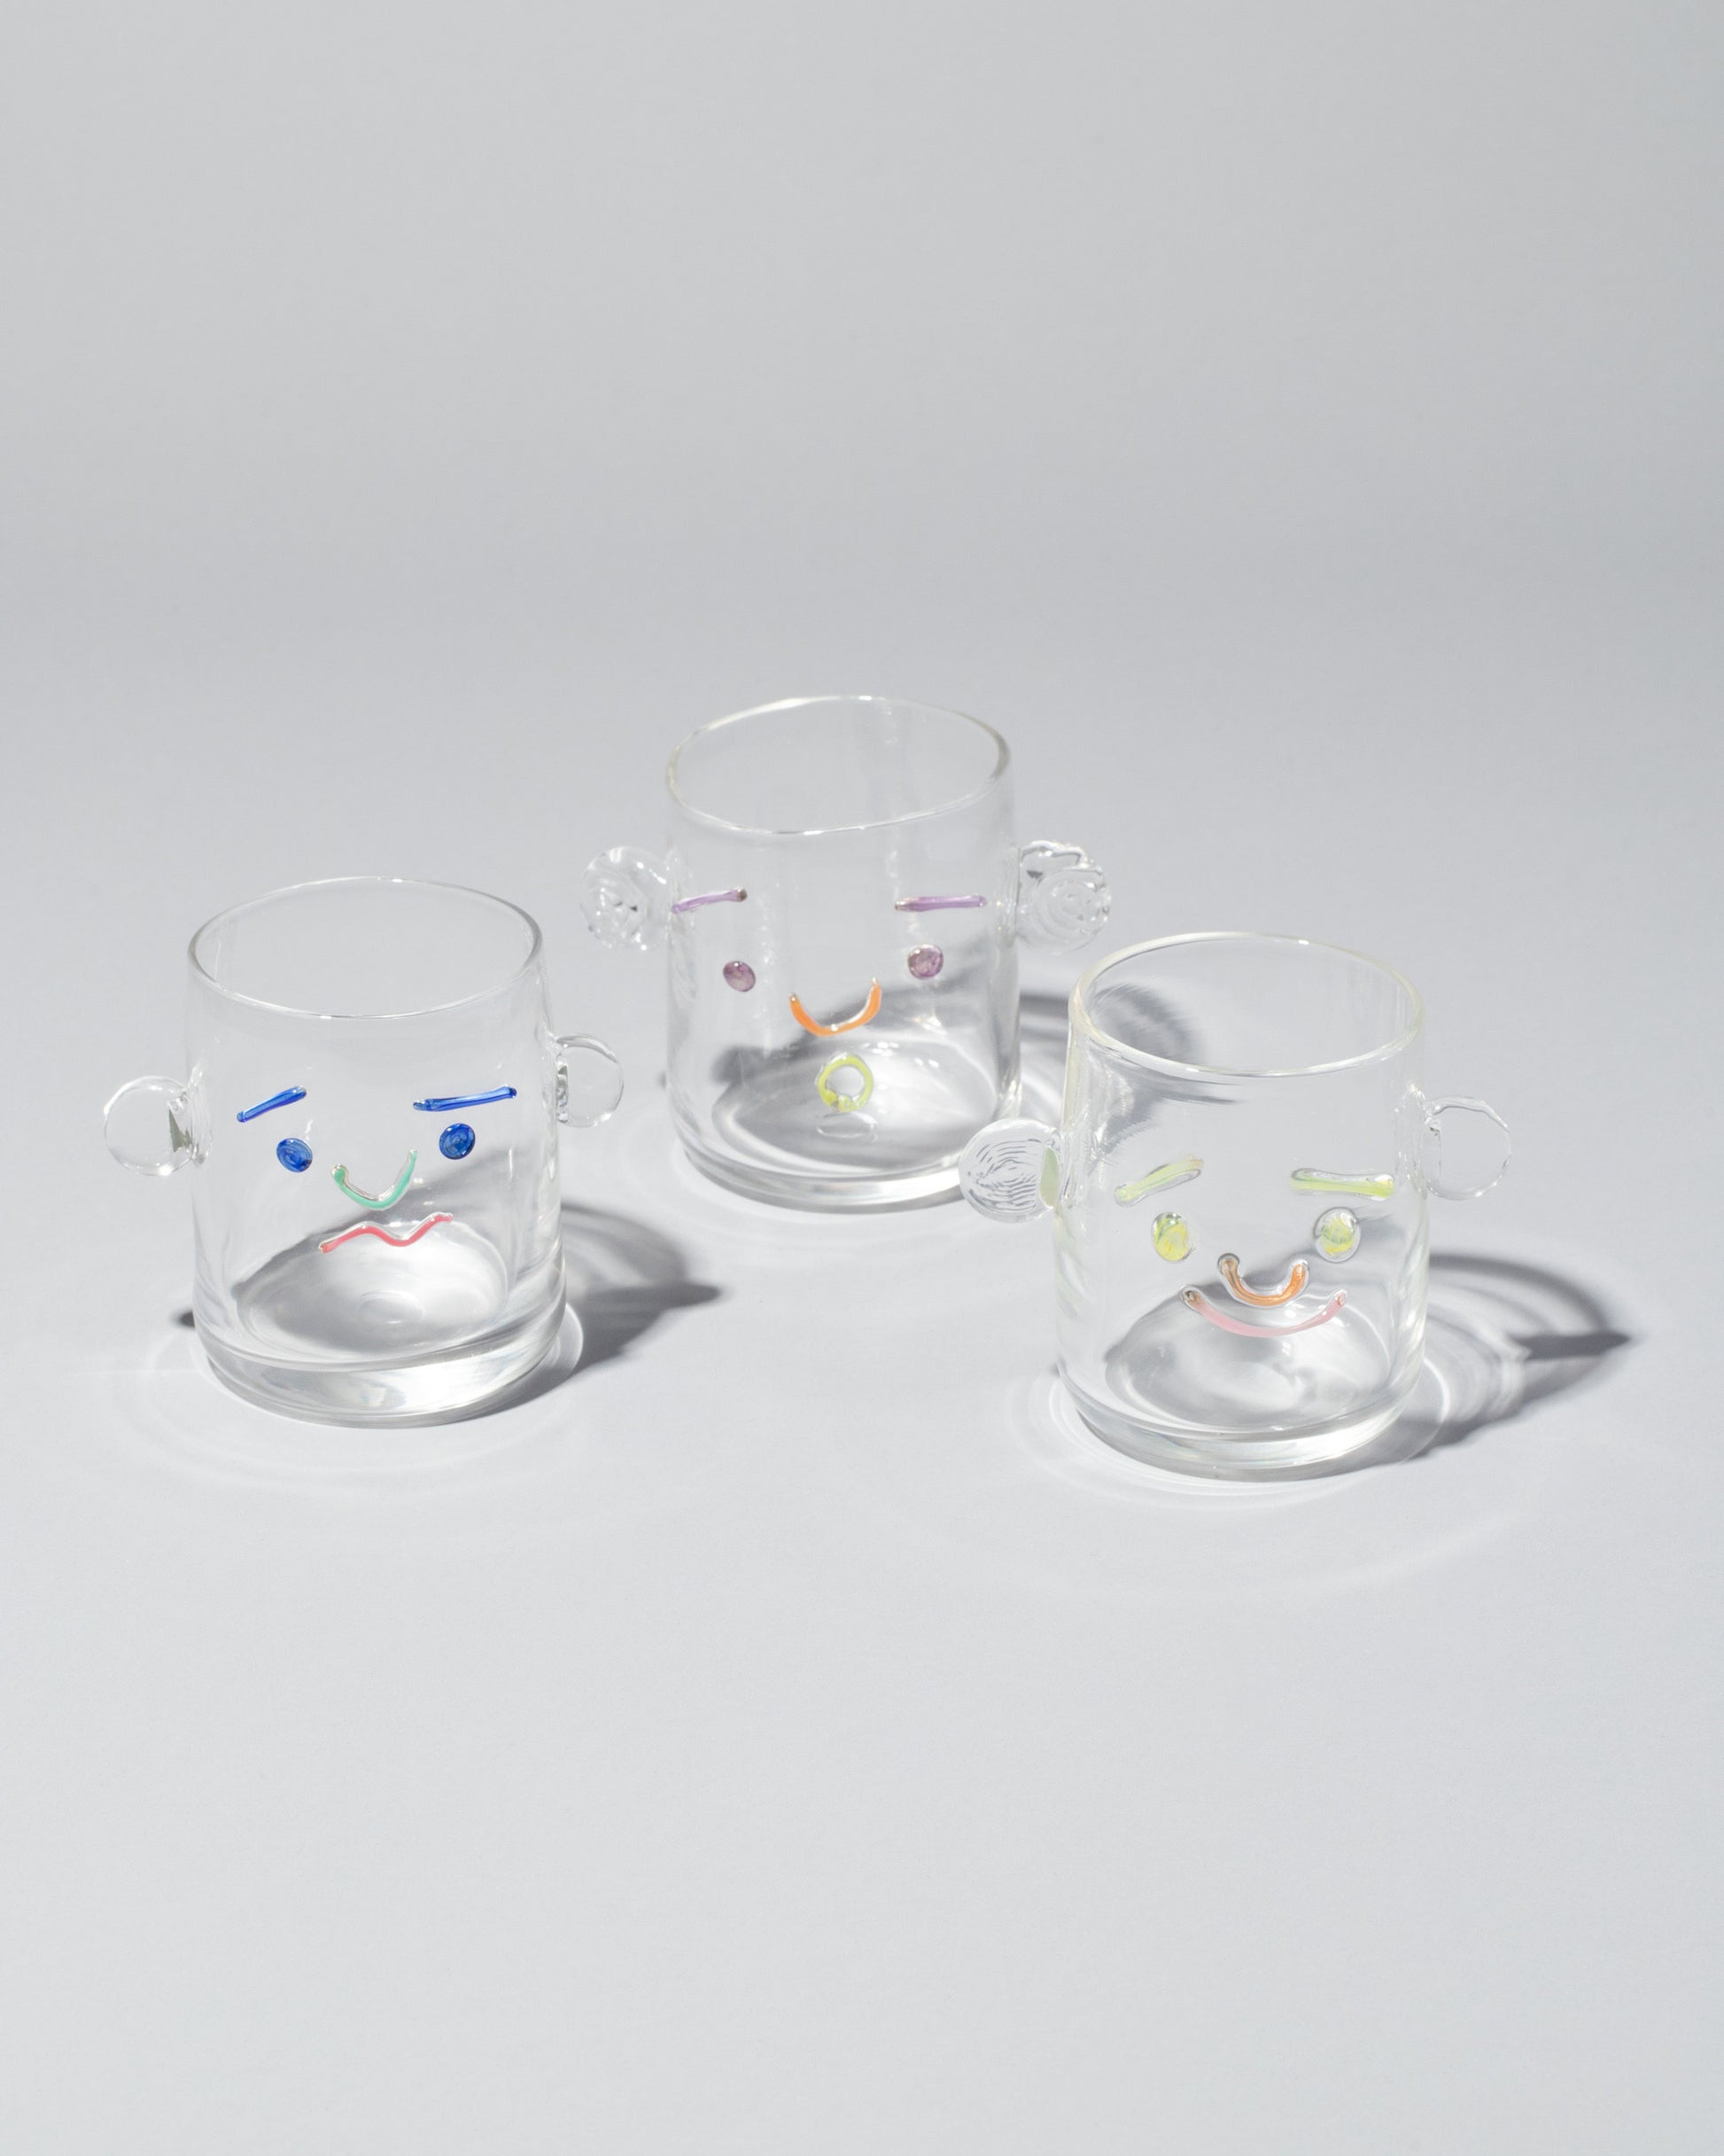 Group of TAK TAK Goods Salty, Surprised and Smiley Face Cups on light color background.